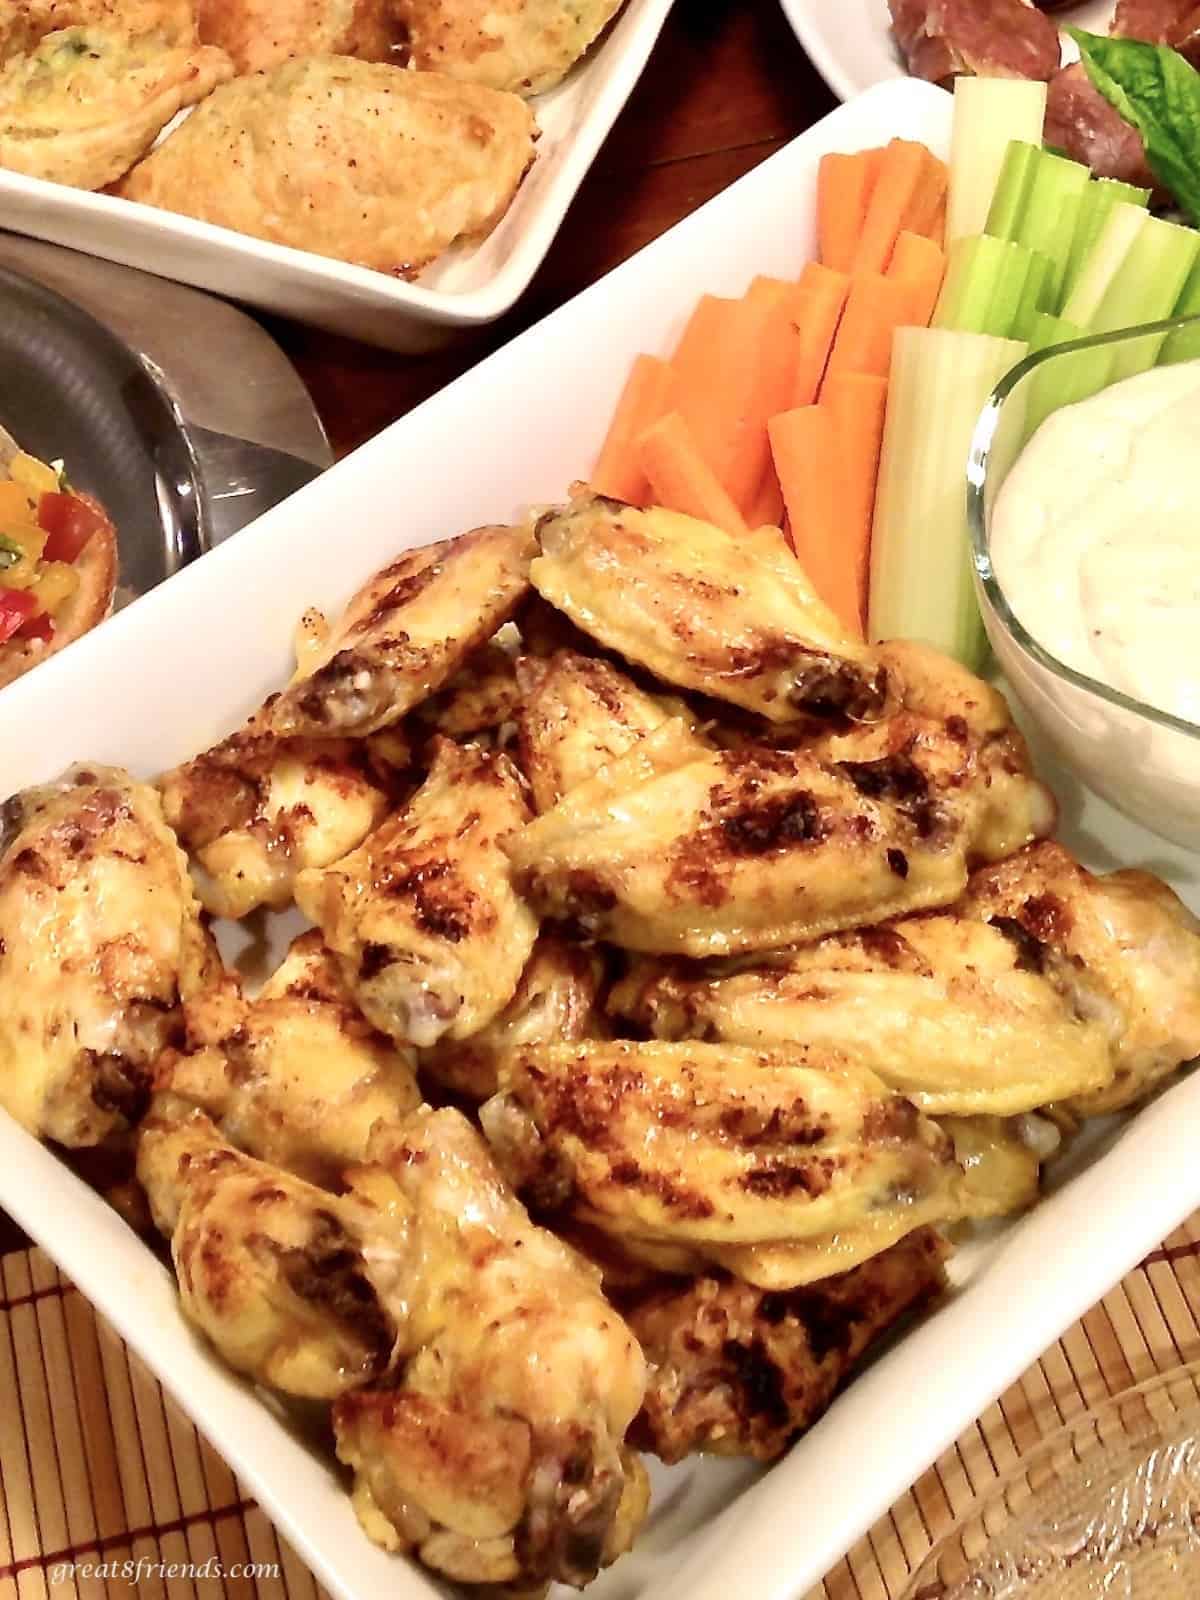 Chicken wings served with dressing, carrots and celery.